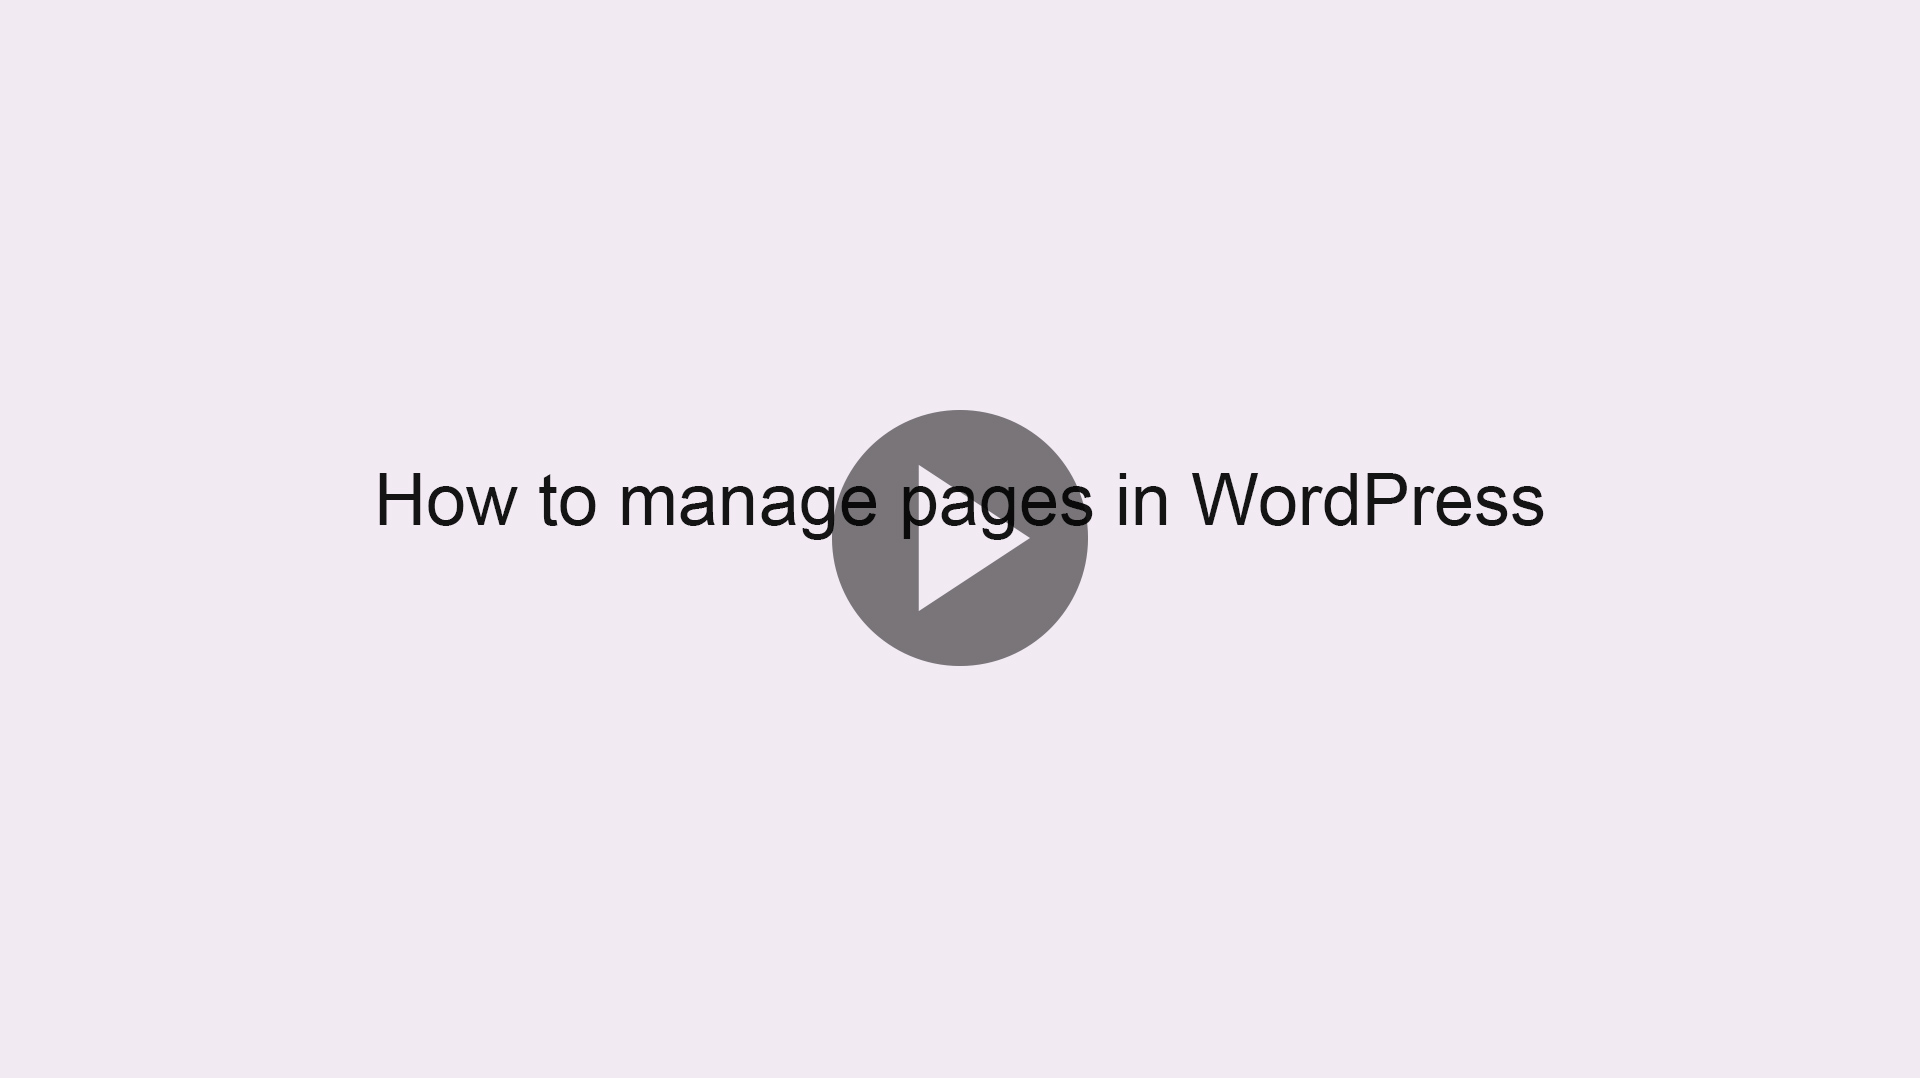 How to manage pages in WordPress